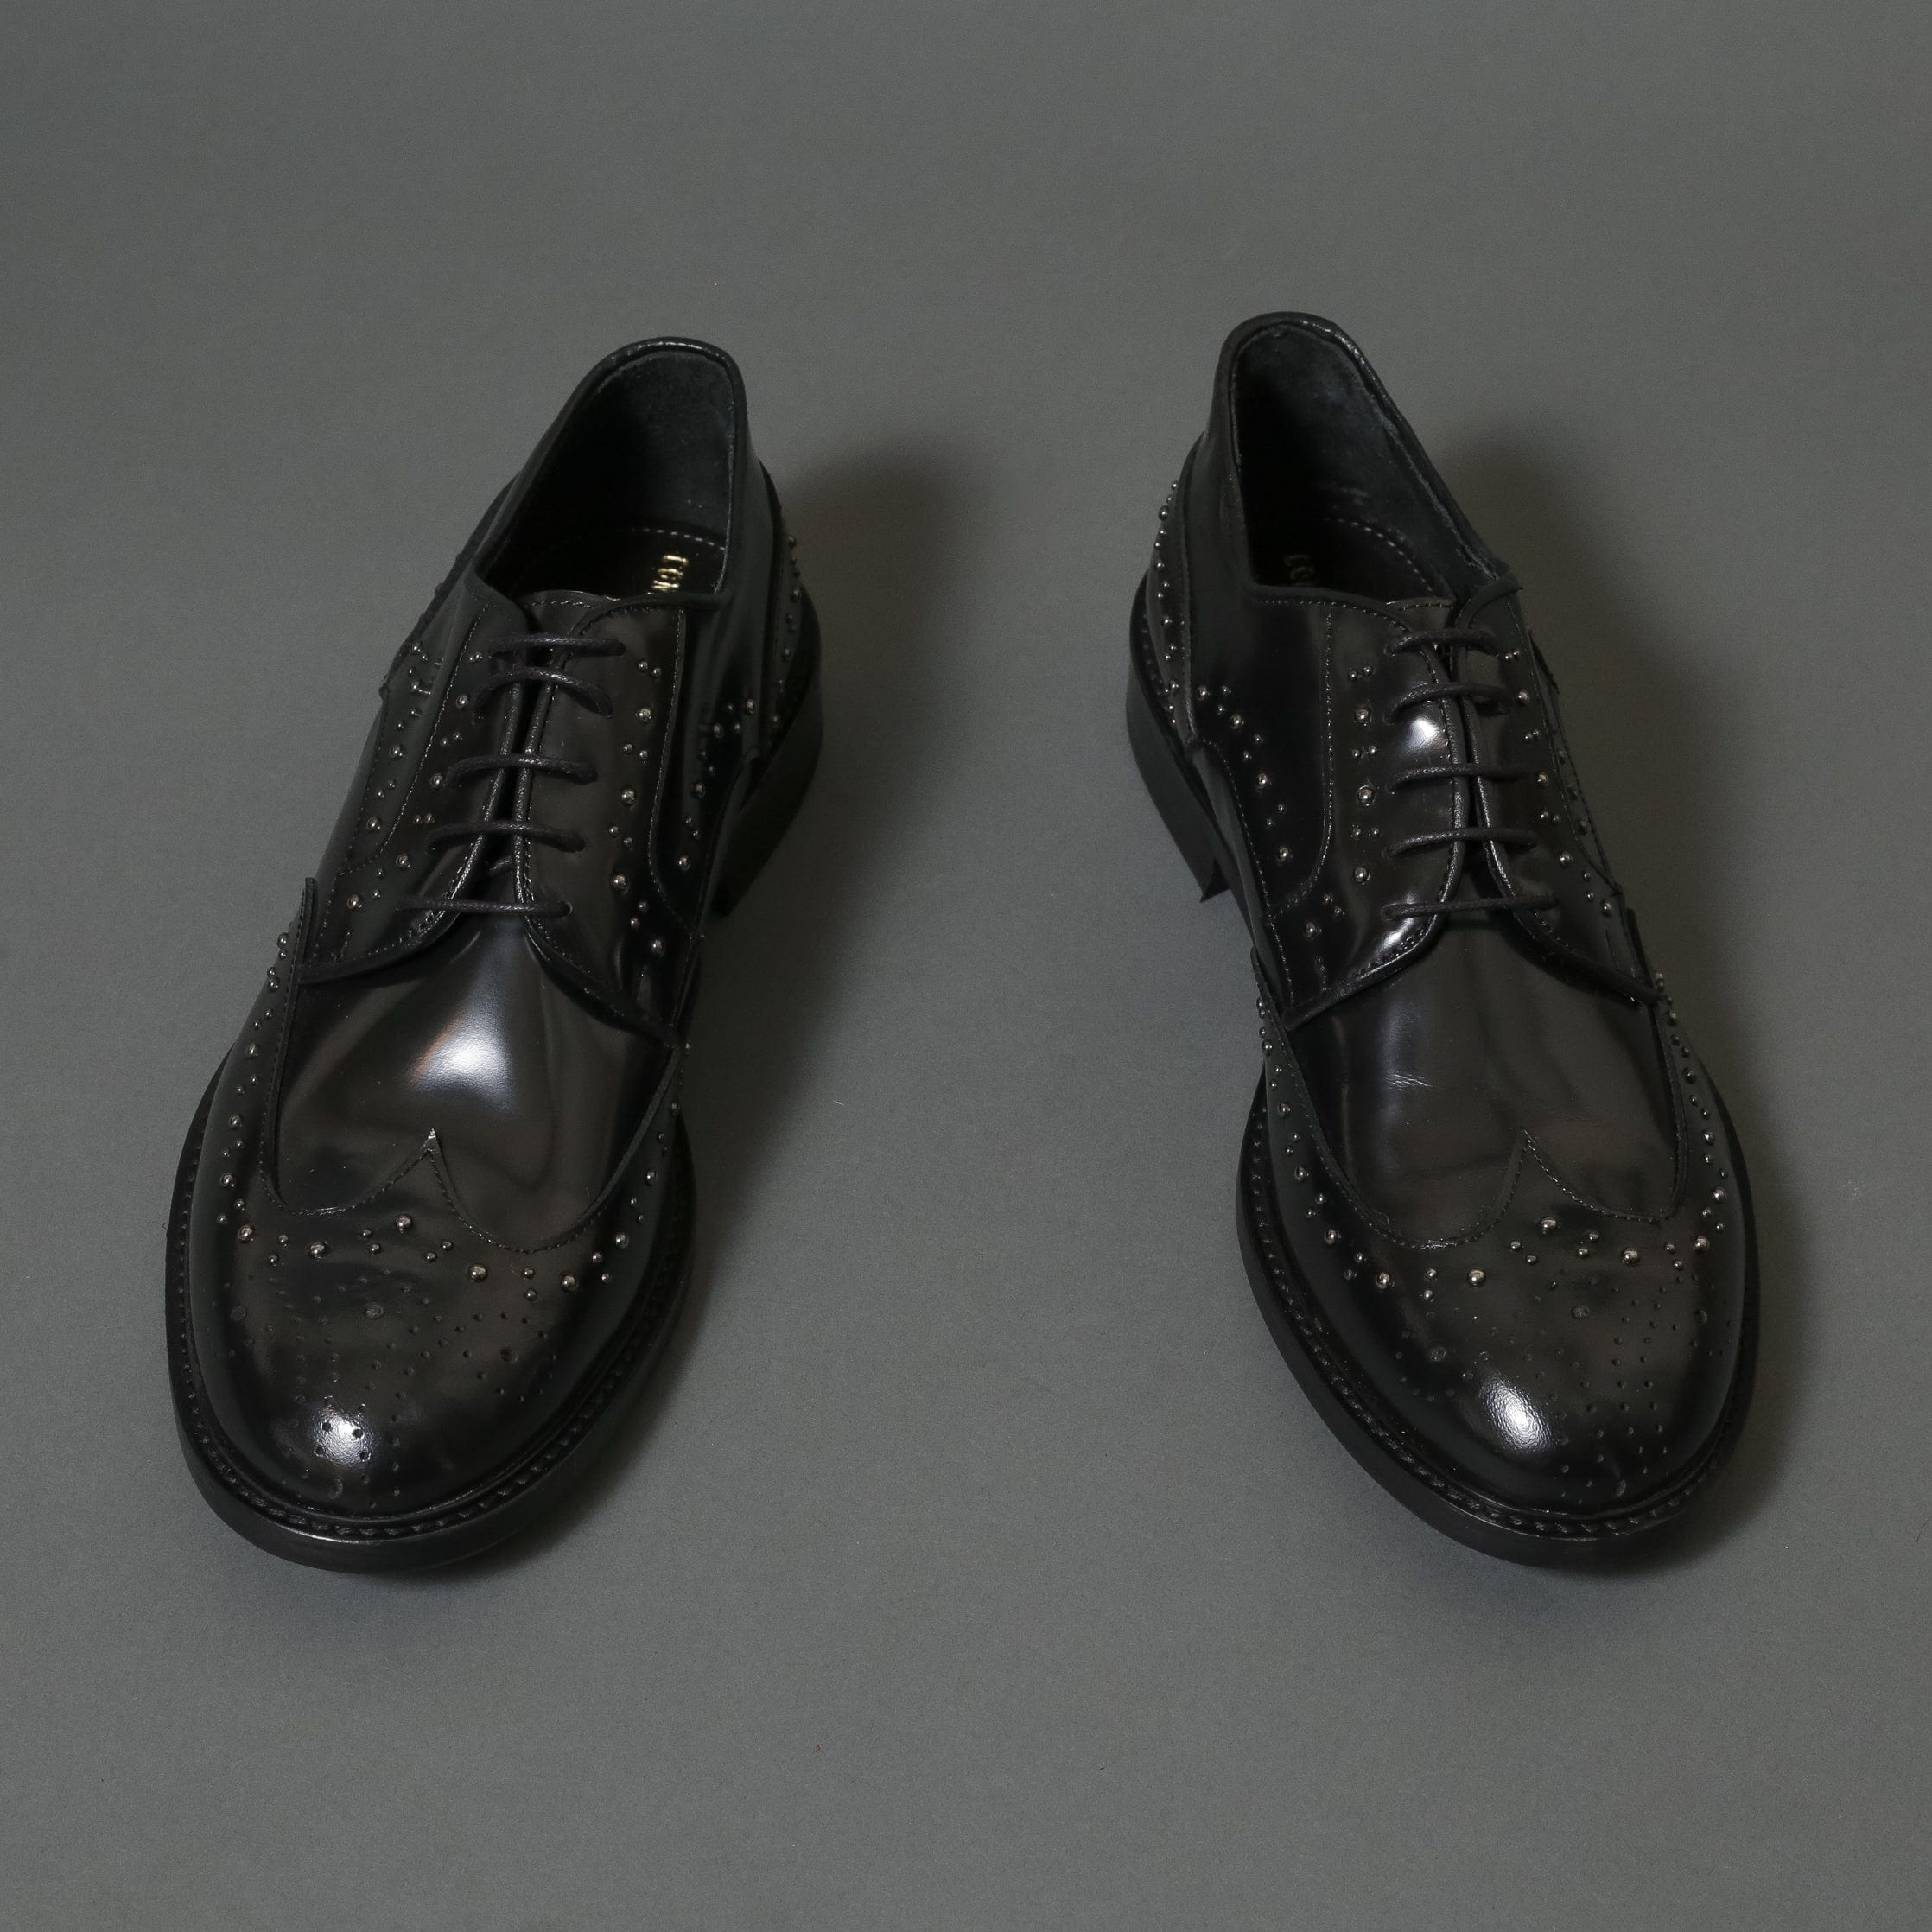 Conflict For Interest Lace Up Derby Conflict For Interest 5601 Black